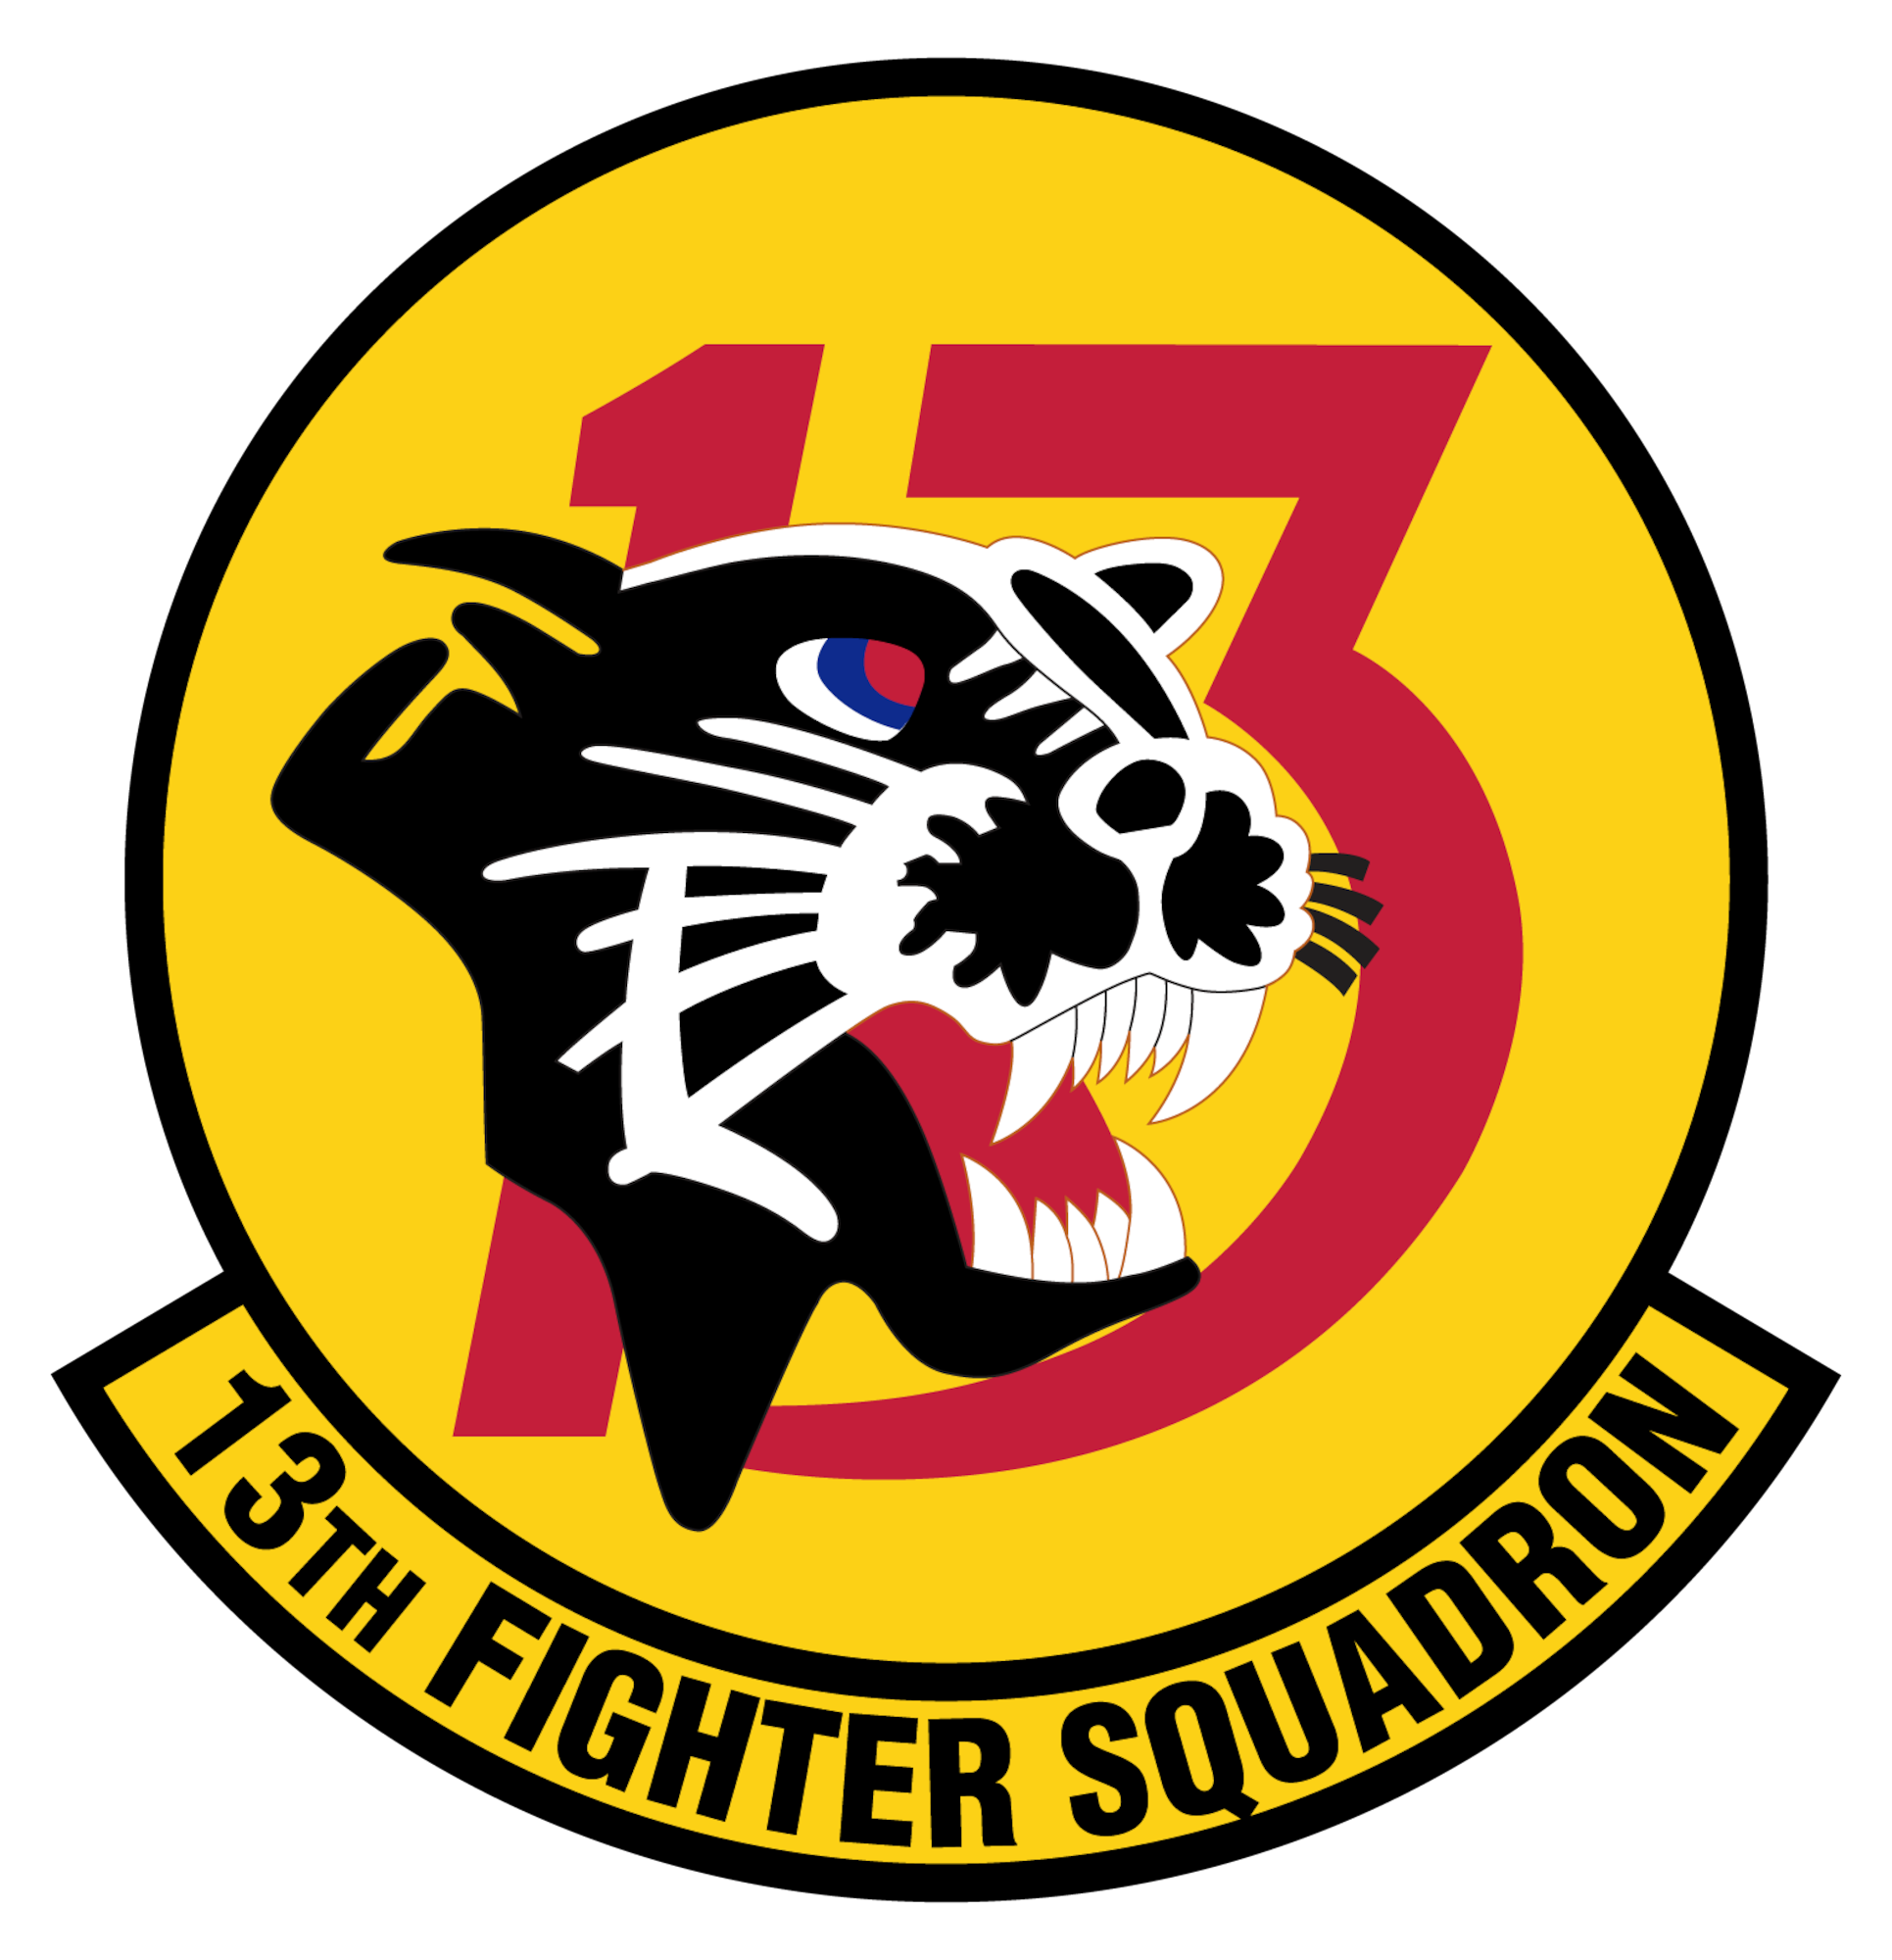 Established as the 313th Bombardment Squadron during World War II, the 13th Fighter Squadron pioneered the Wild Weasel mission during the Vietnam War. In 1972, the 13 FS adopted a black Asian leopard named Eldridge and became known as the “Panther Pack.” On June 1, 1985, the squadron activated at Misawa Air Base flying for the 432nd and 35th Operations Group. (Graphic courtesy of U.S. Air Force)